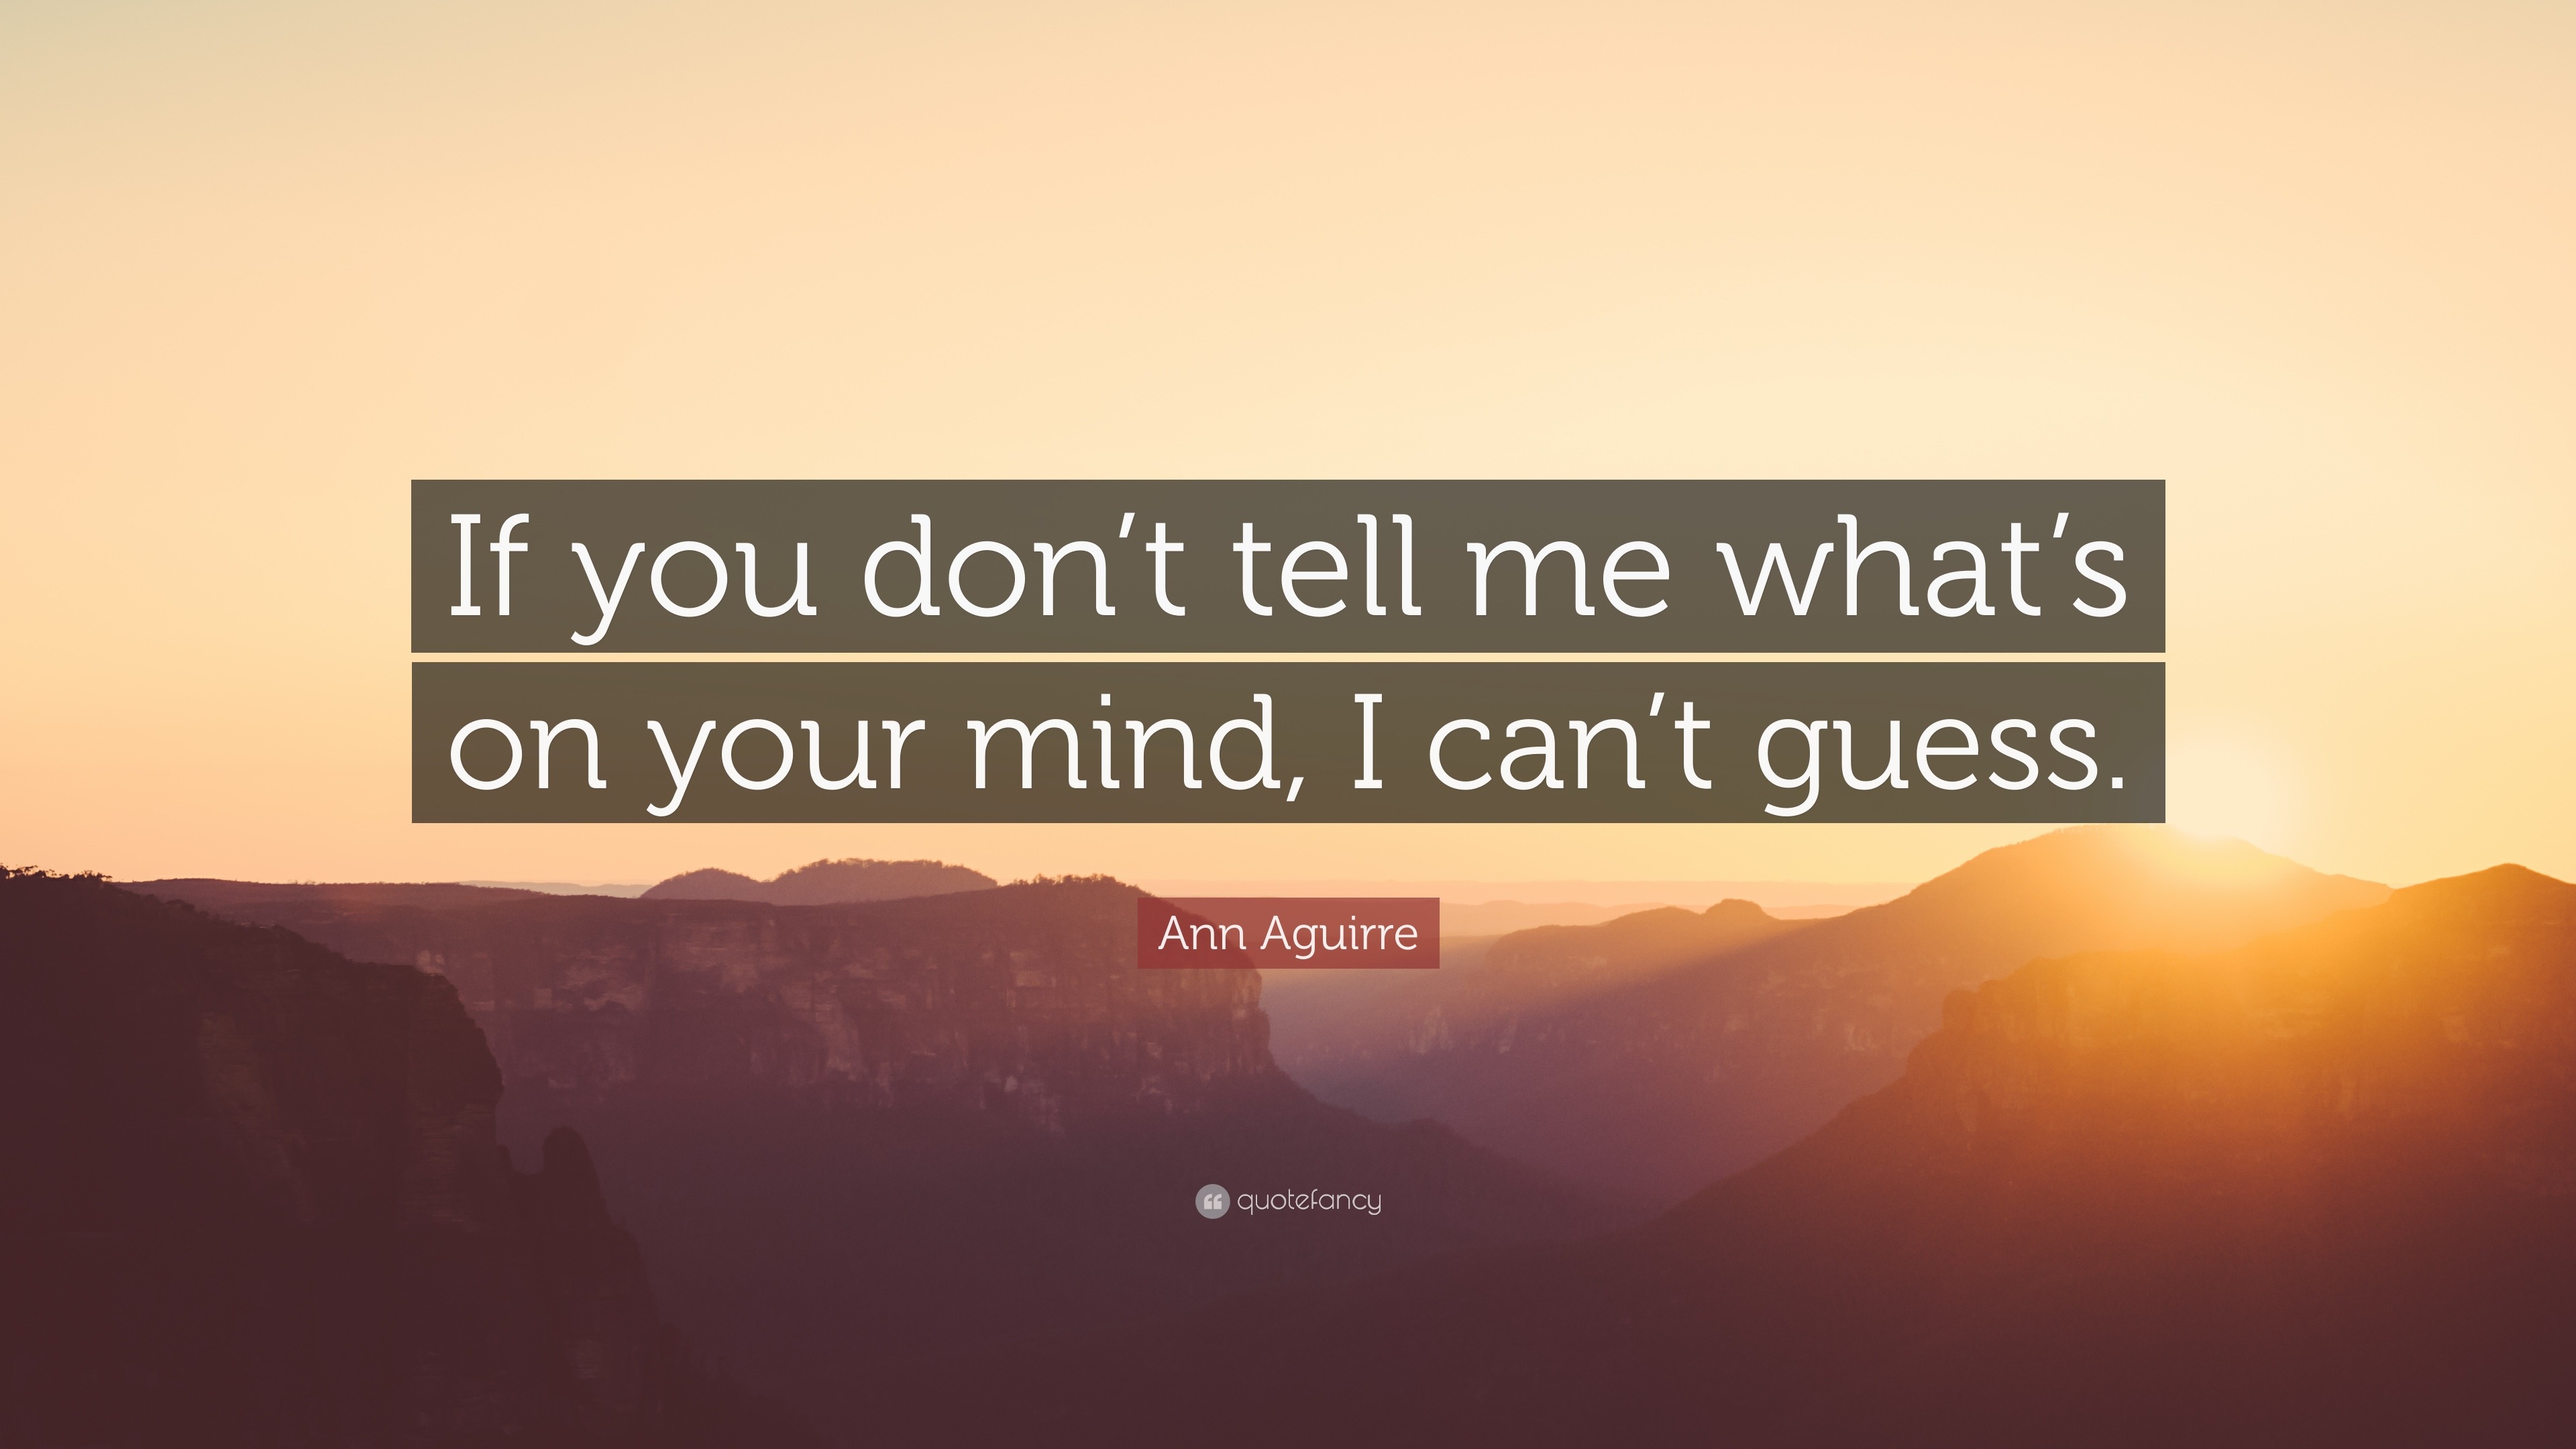 klon Prevail fond Ann Aguirre Quote: “If you don't tell me what's on your mind, I can't